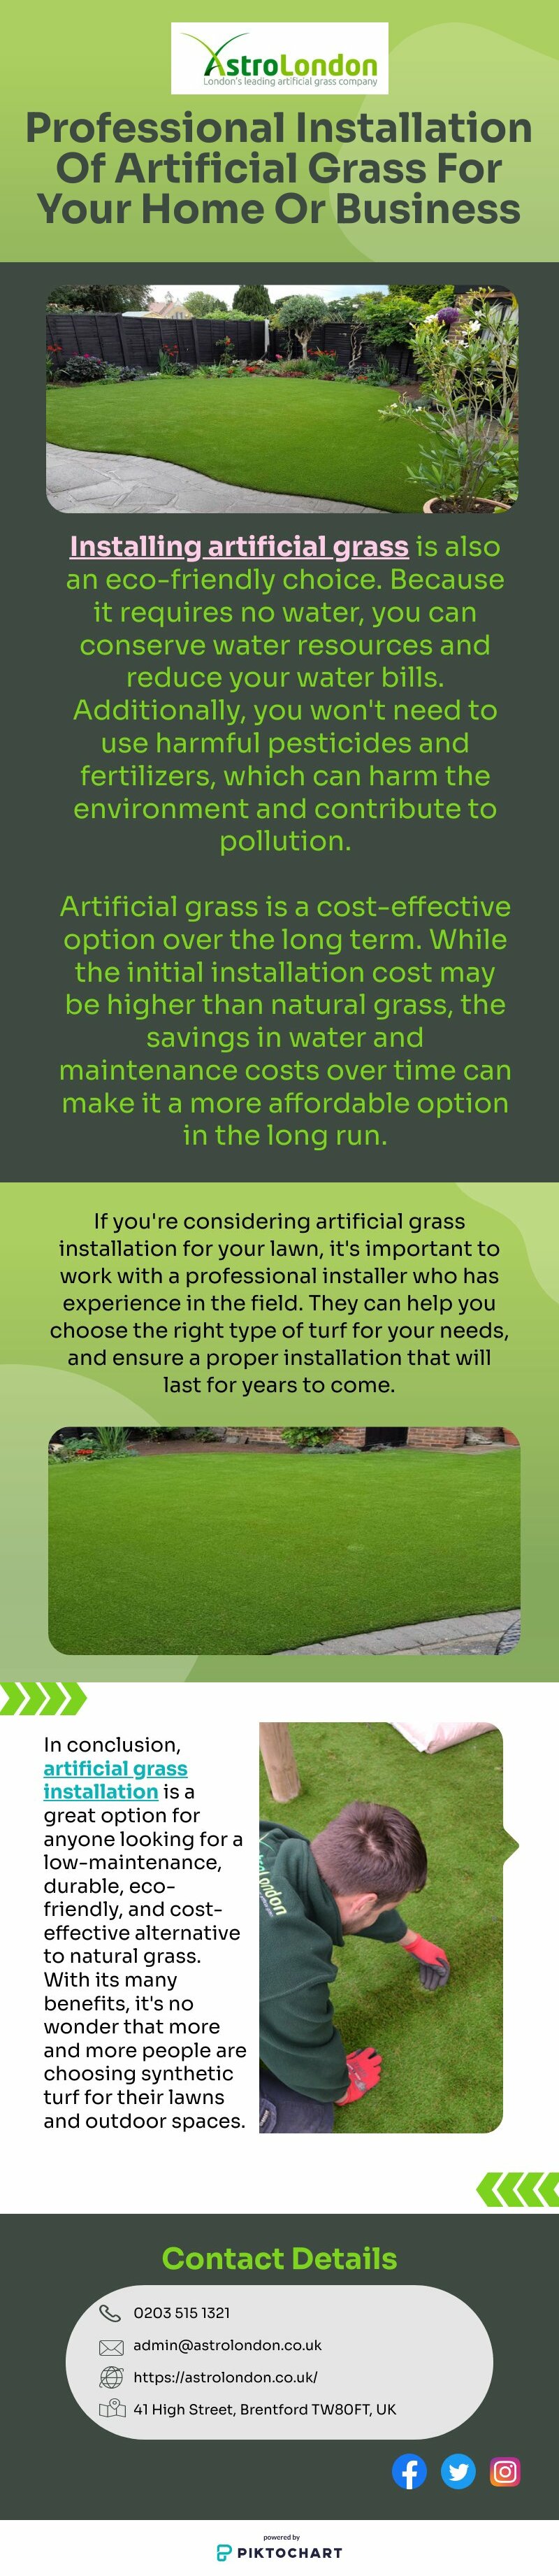 Professional Installation Of Artificial Grass For Your Home  | Piktochart Visual Editor